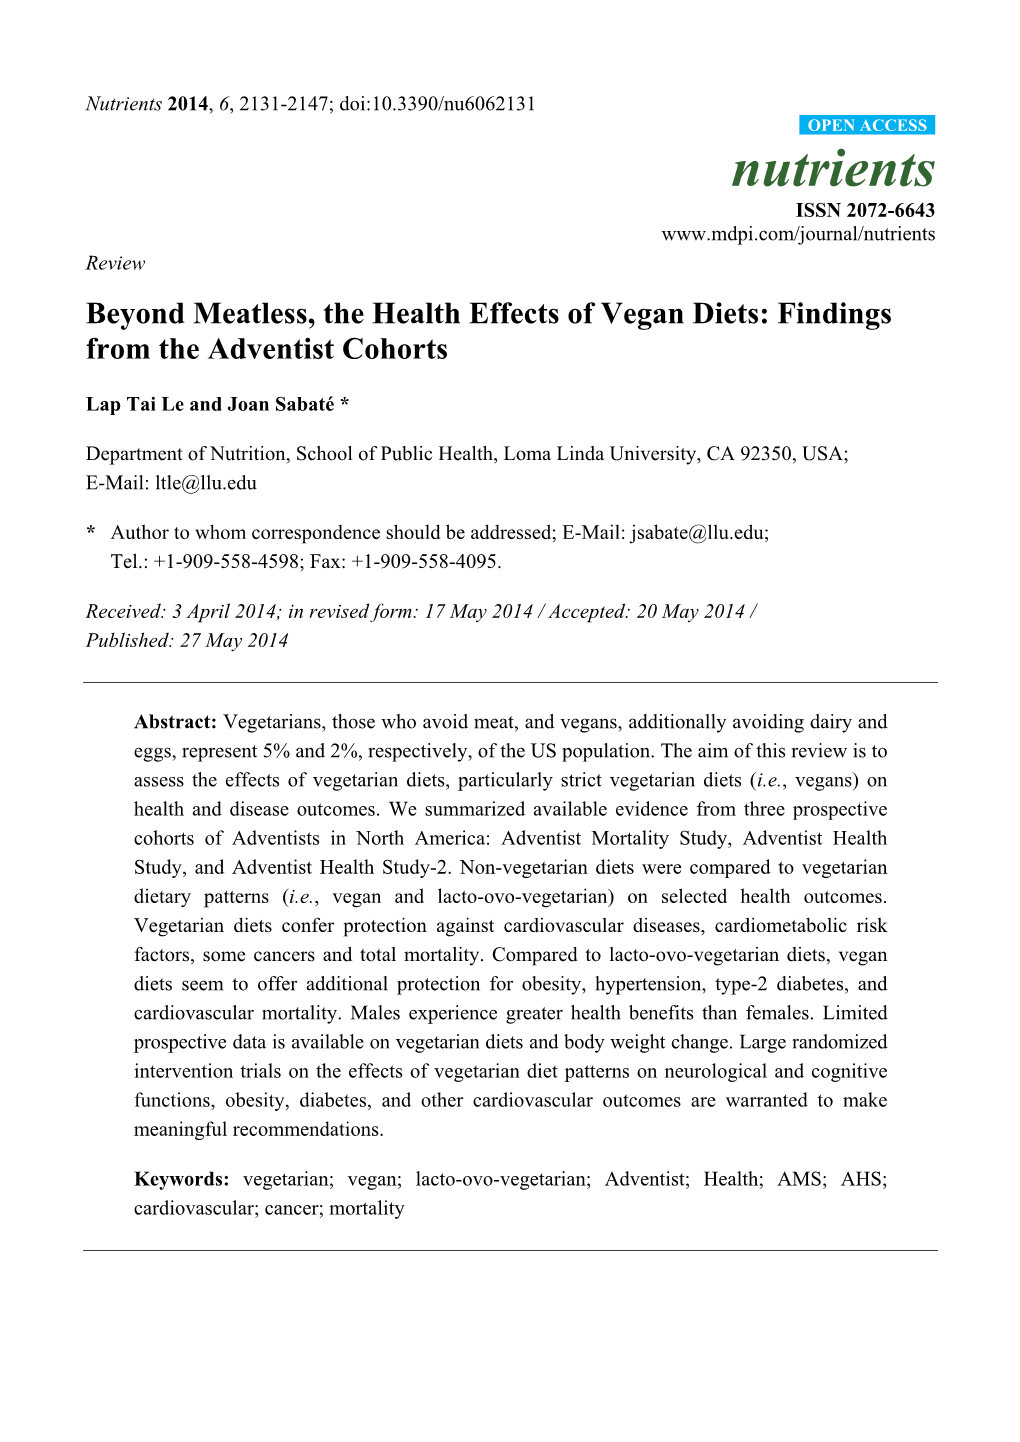 Beyond Meatless, the Health Effects of Vegan Diets: Findings from the Adventist Cohorts